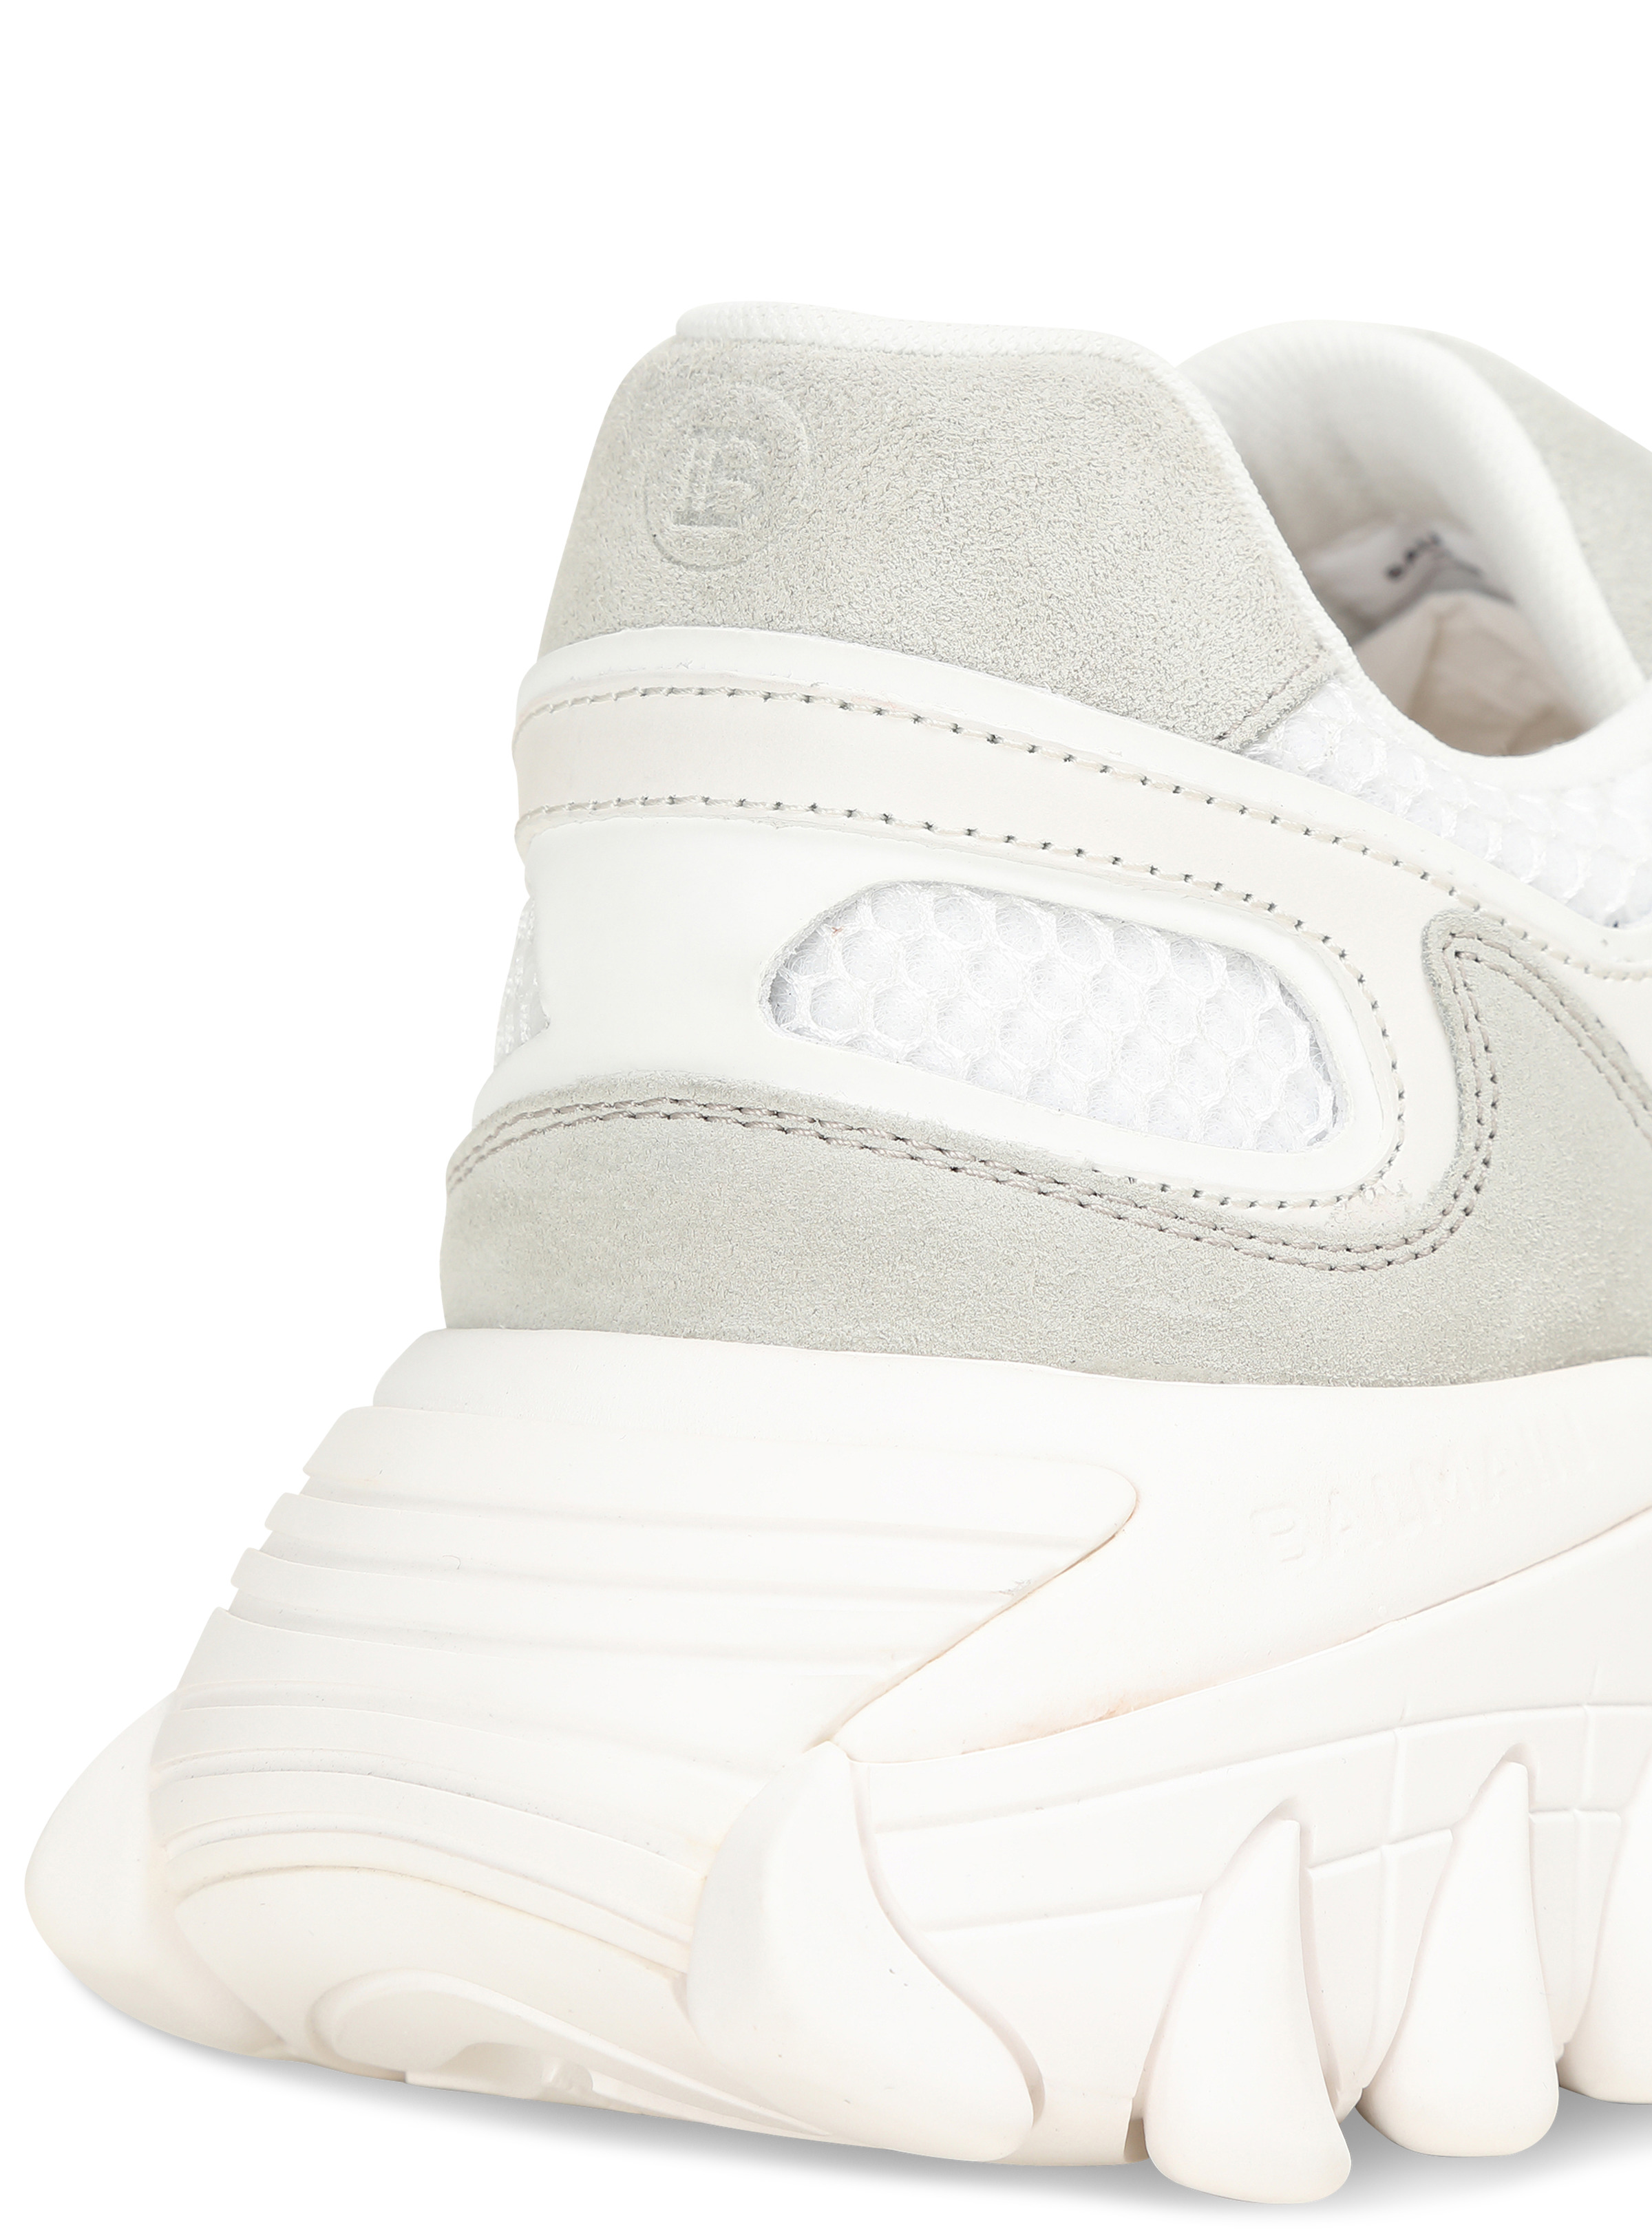 B-East trainer in leather, suede and mesh white - Women